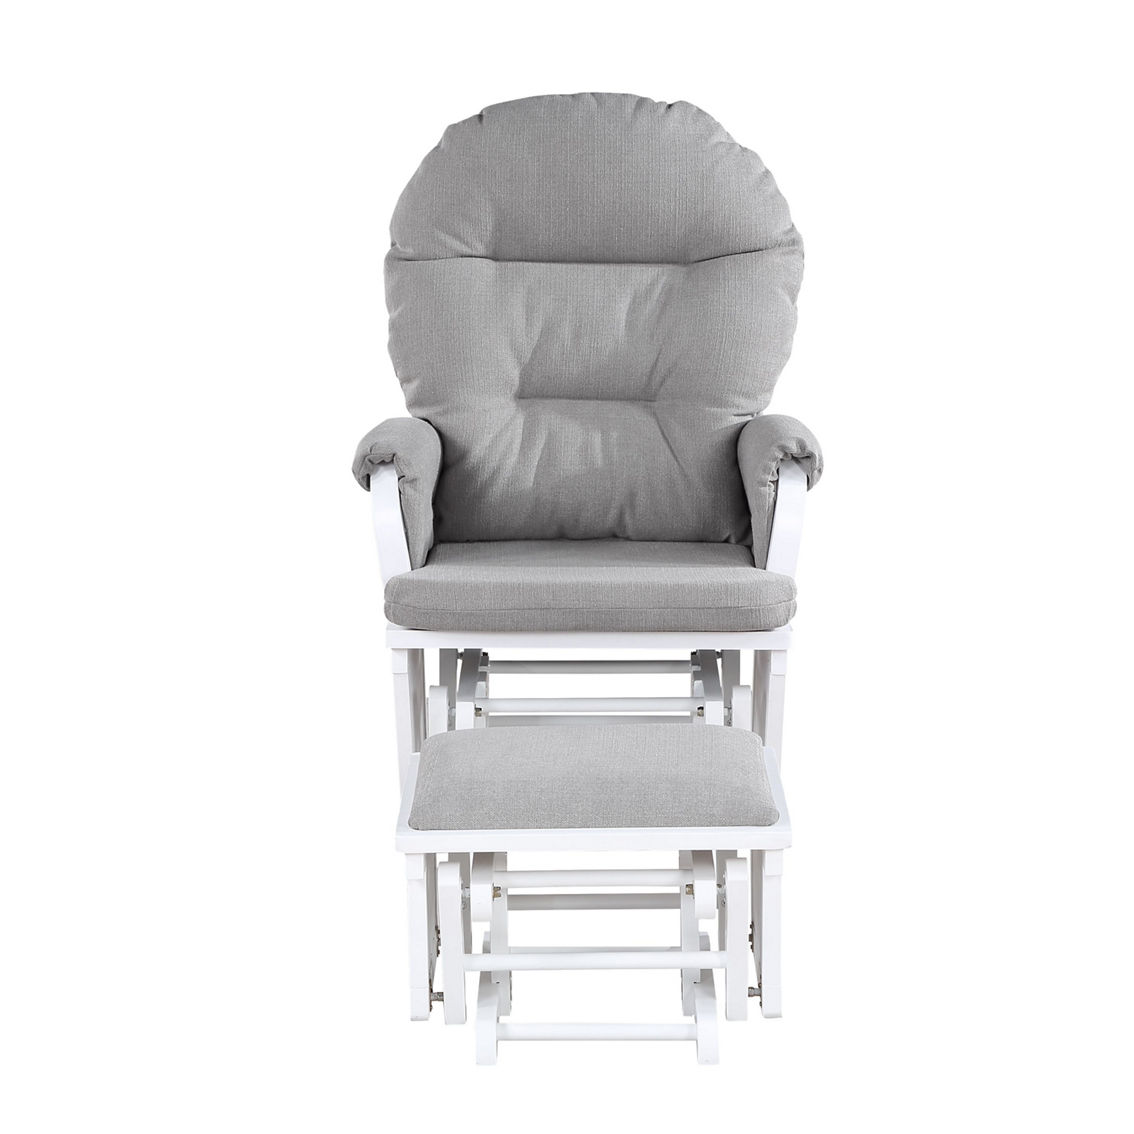 Suite Bebe Madison Glider and Ottoman White/Oyster - Image 2 of 5